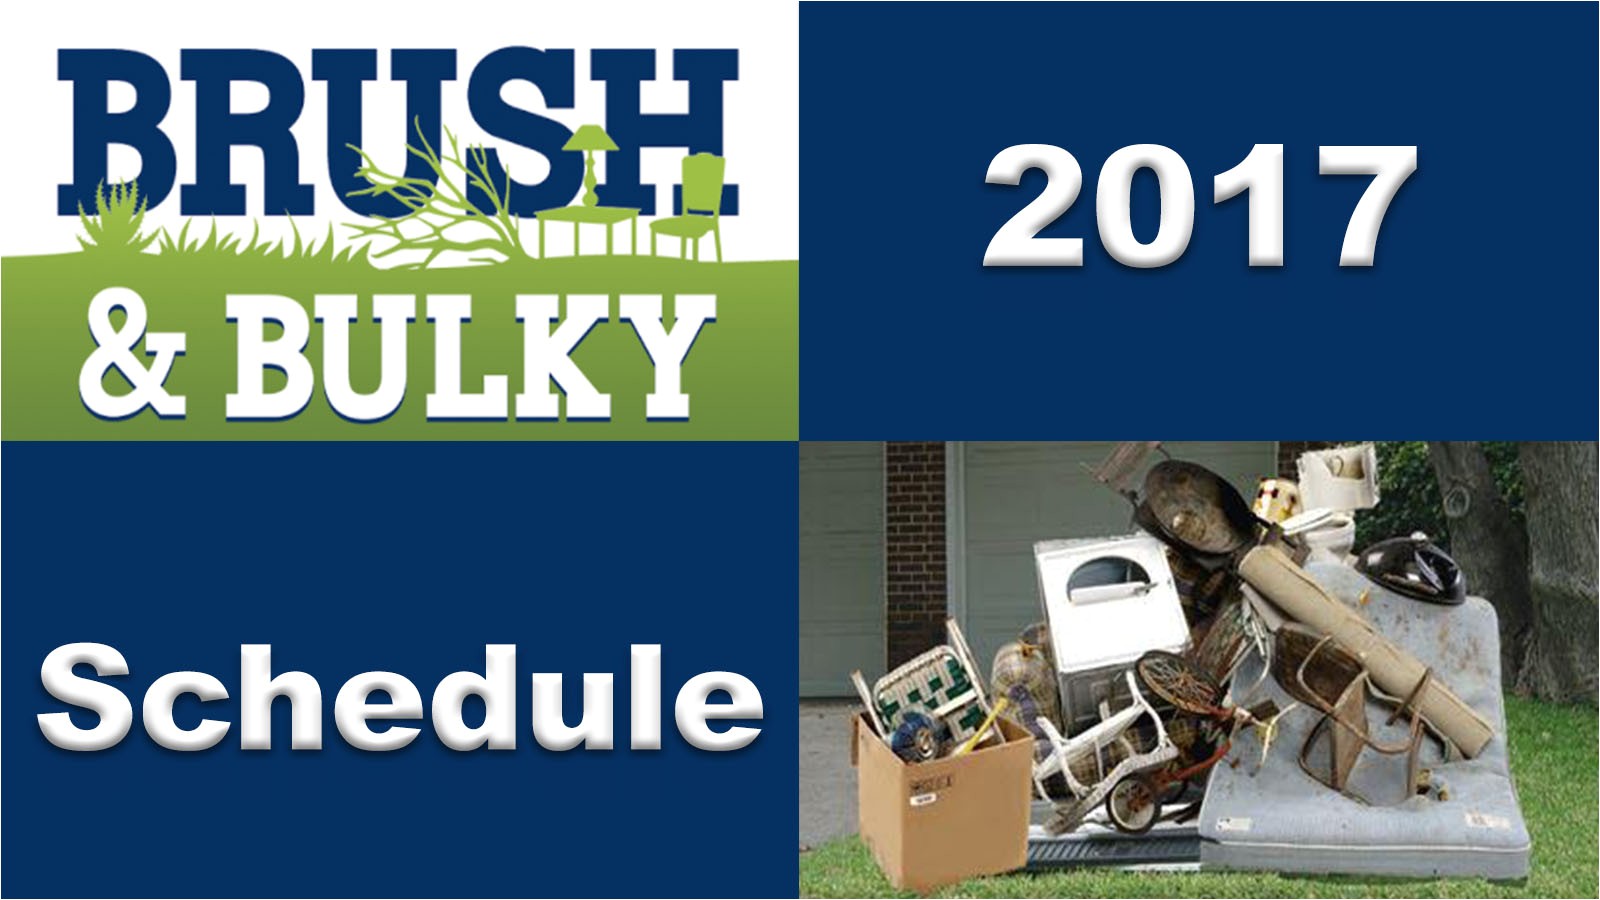 Brush and Bulky Schedule Tucson Environmental Services Official Website Of the City Of